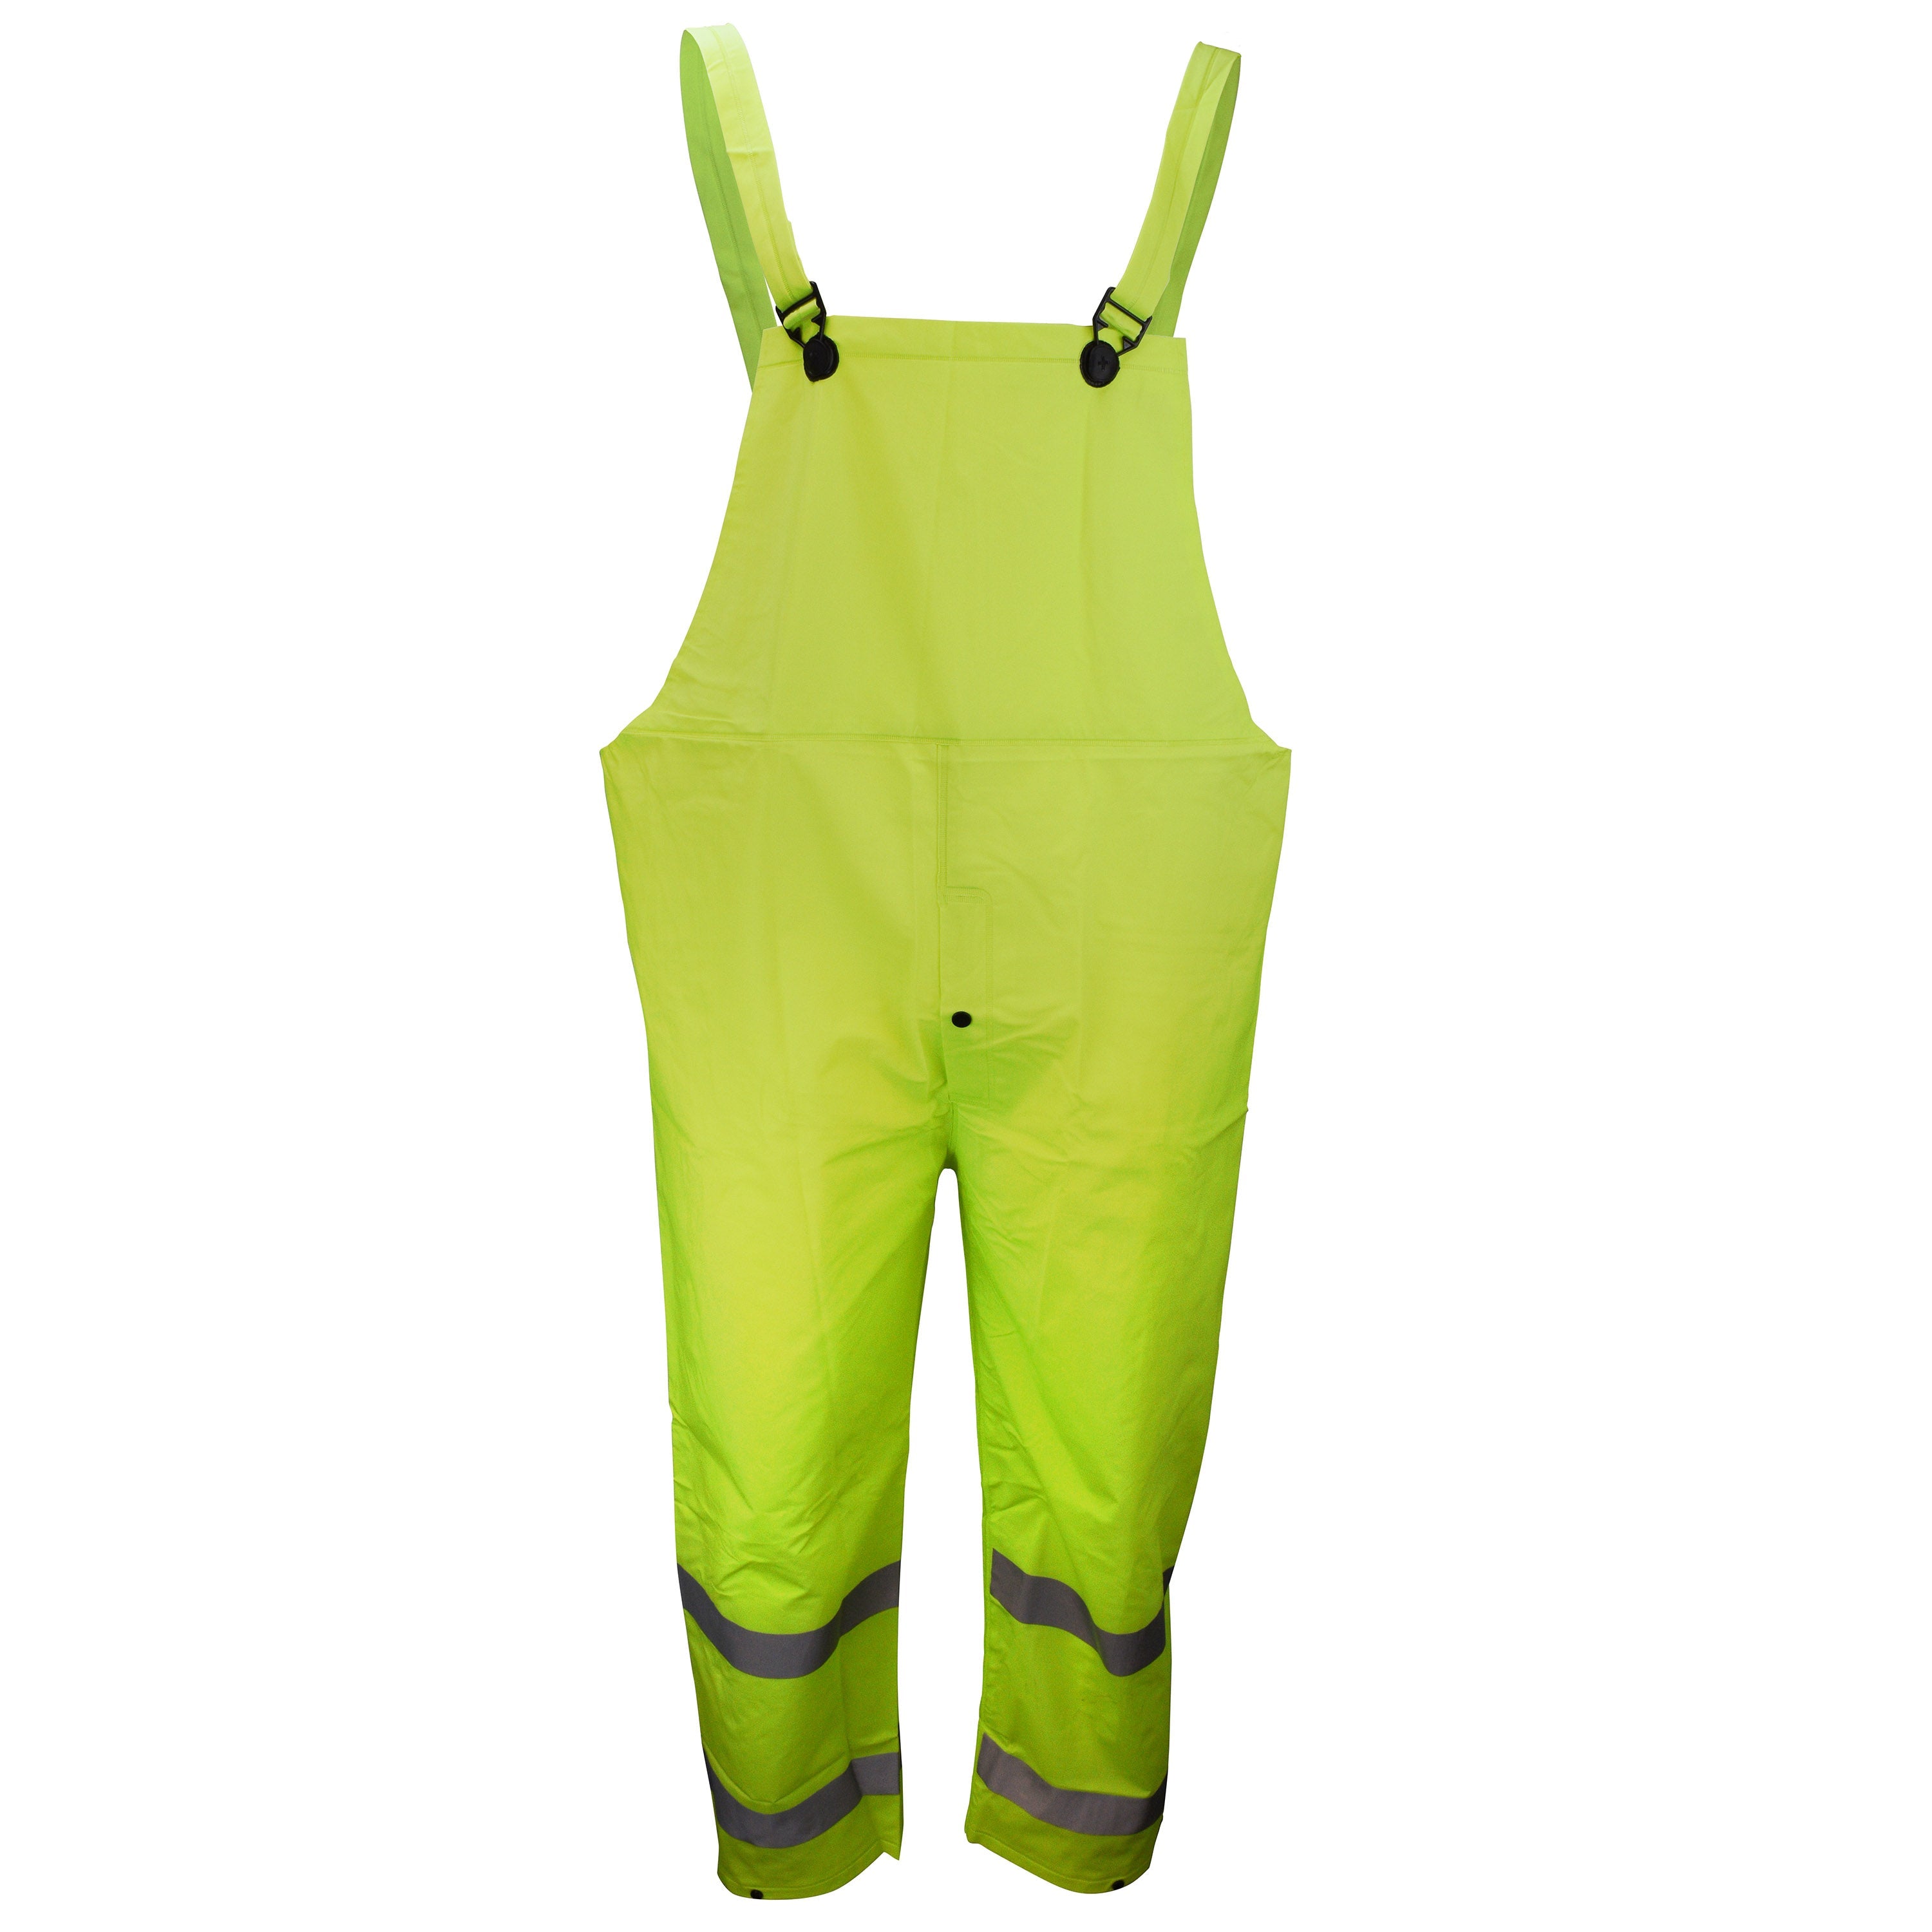 Neese 1820BTF Econo-Viz Series Bib Trouser with Fly and Reflective Tape